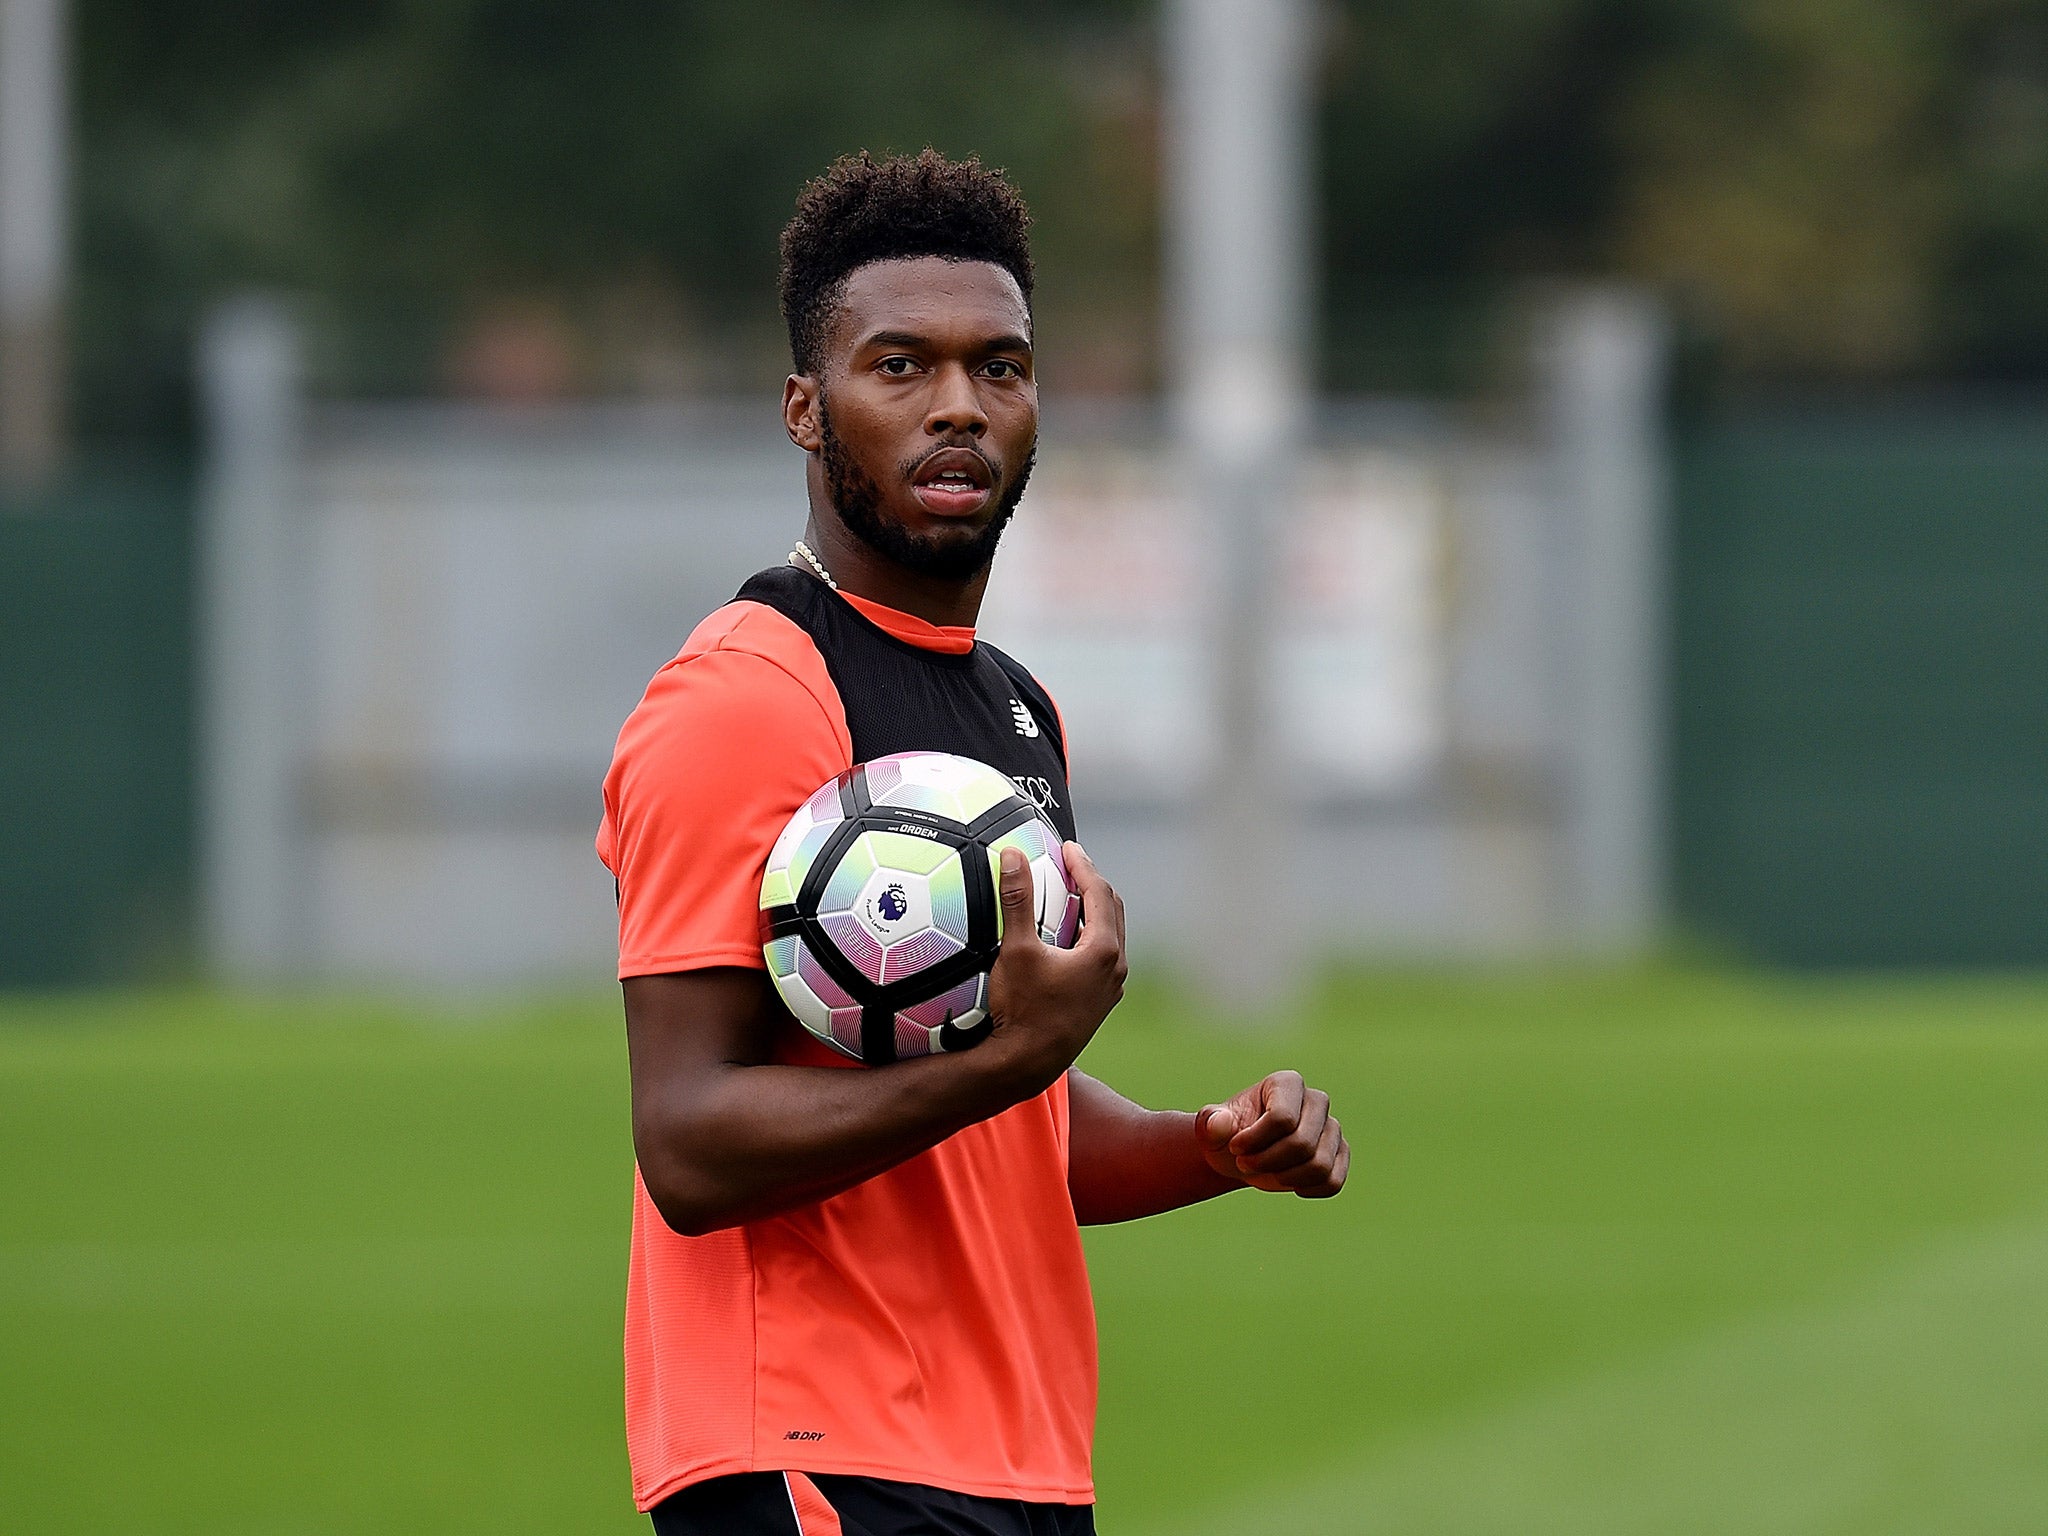 Bookmakers have cut odds on Daniel Sturridge joining Arsenal